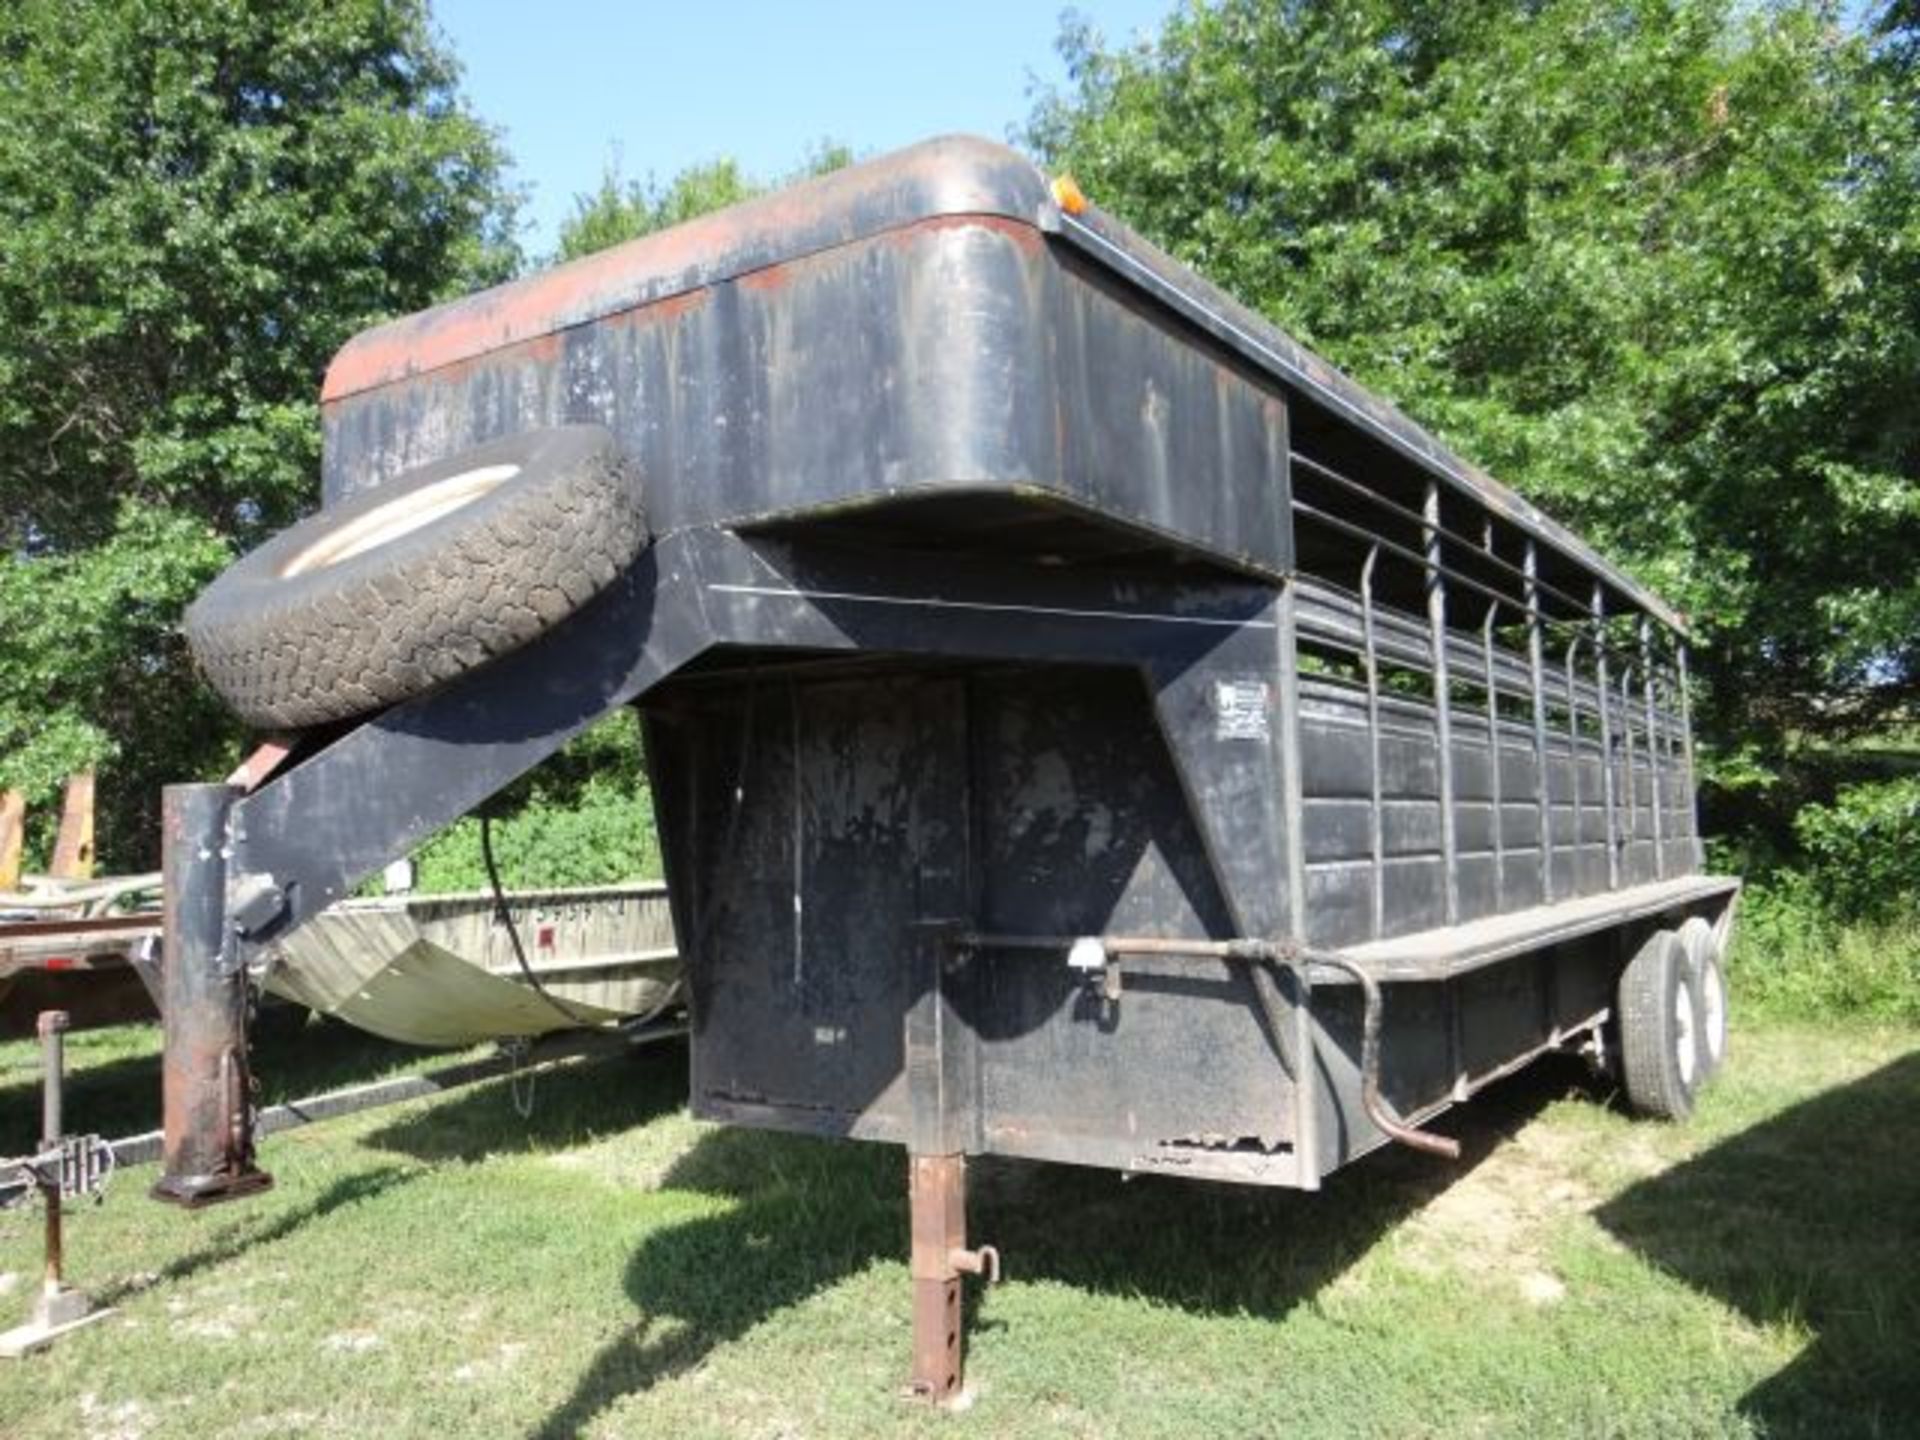 1987 WW Livestock Trailer 20', 3 New Tires, New Floor, Title in the Office